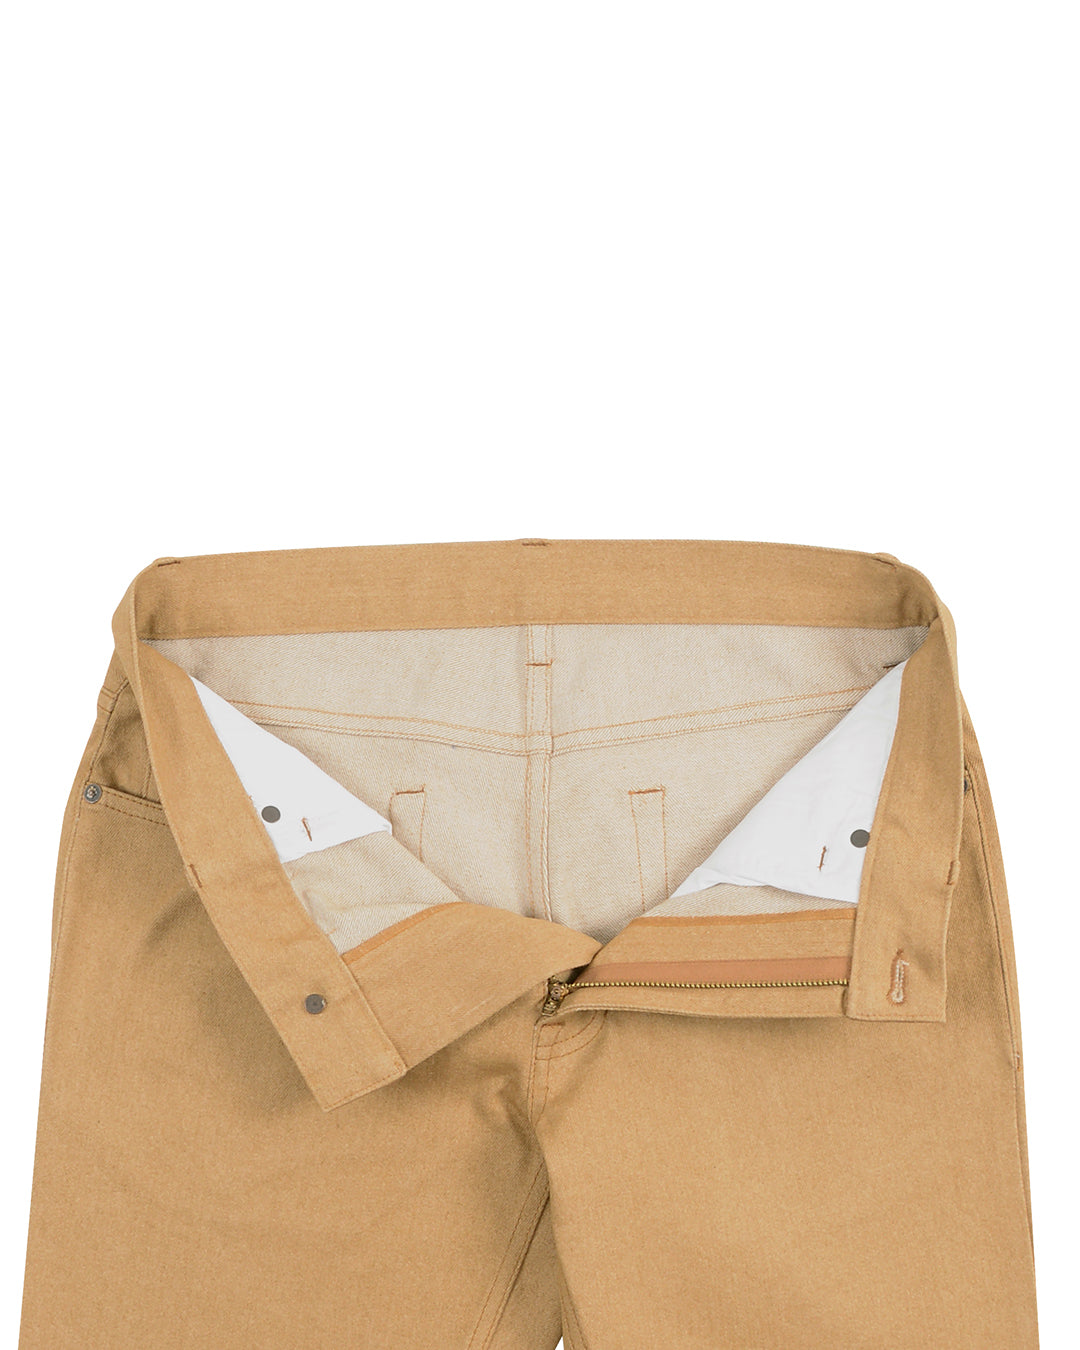 Front open view of denim jeans for men by Luxire in sandstone